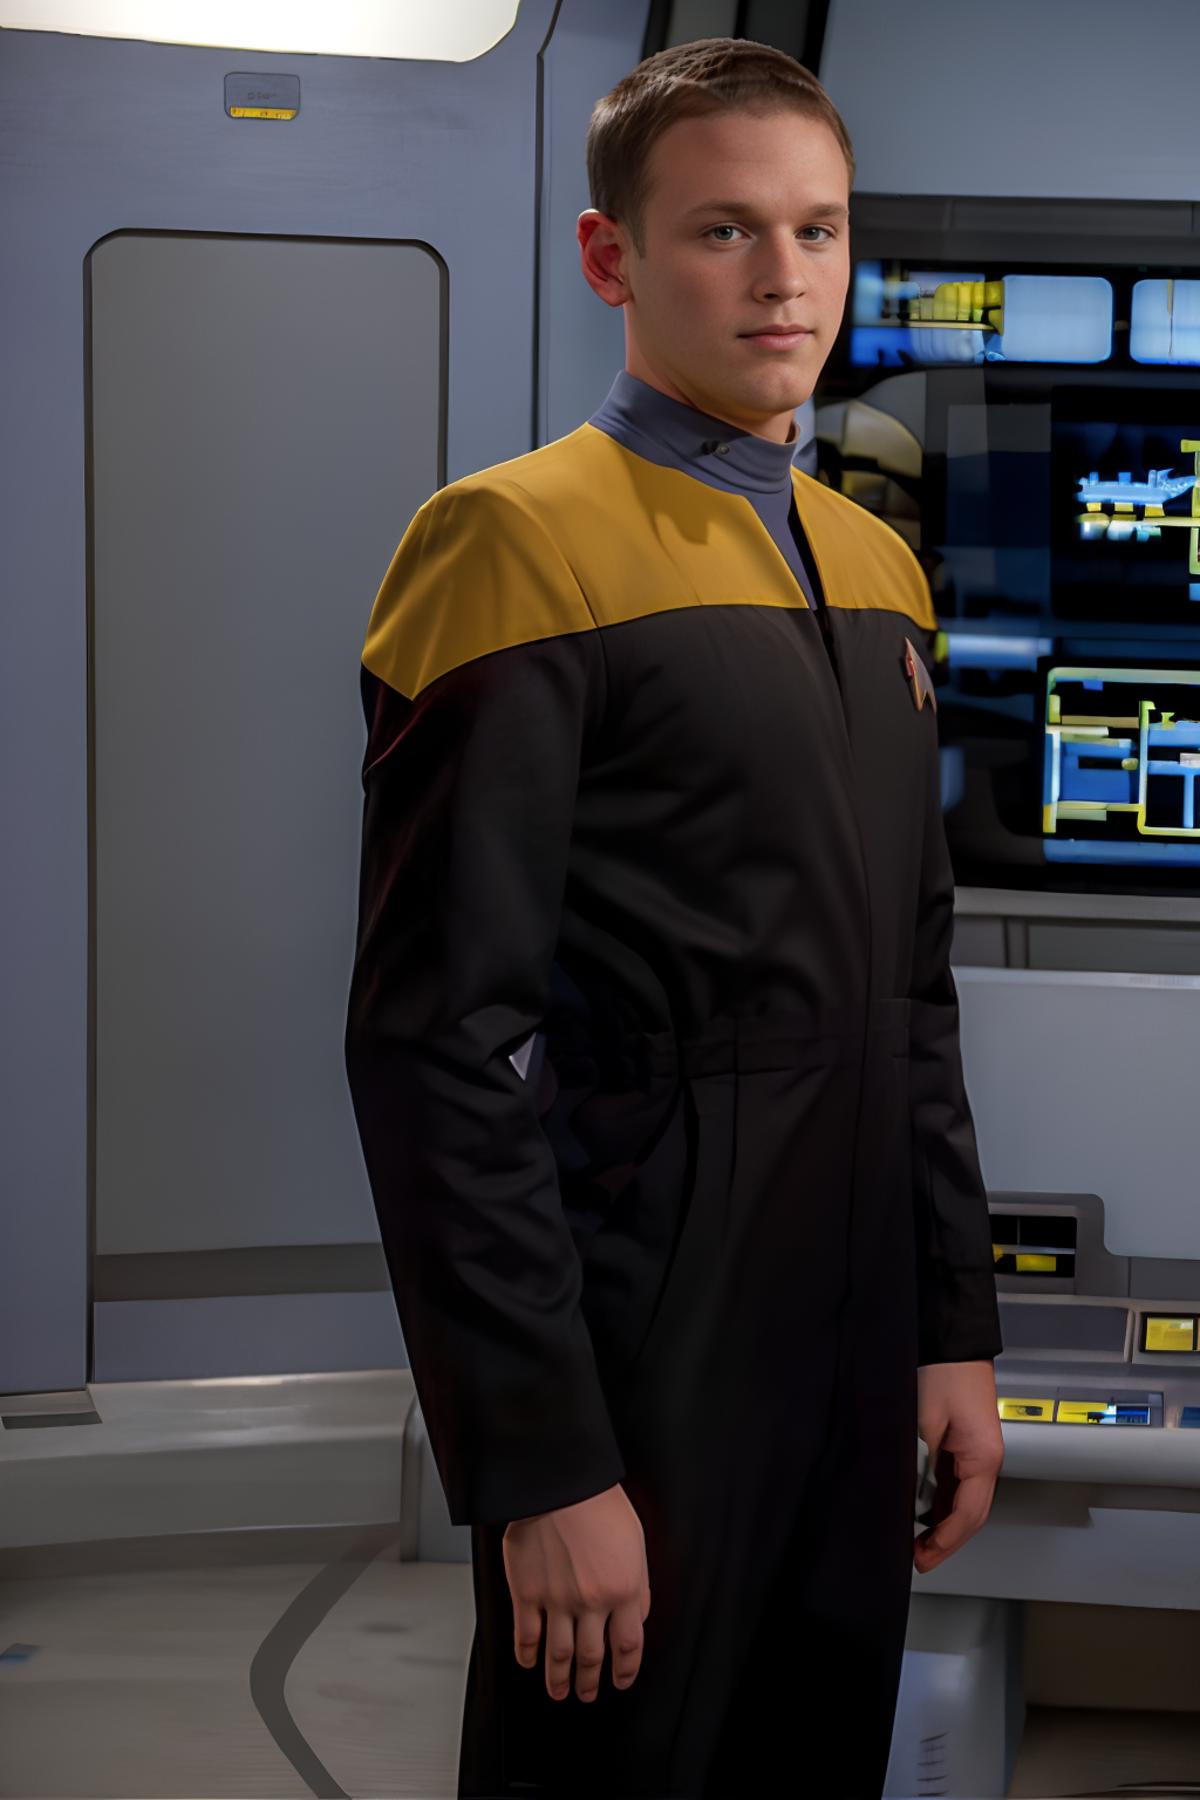 Star Trek Voyager uniforms image by txhorn75